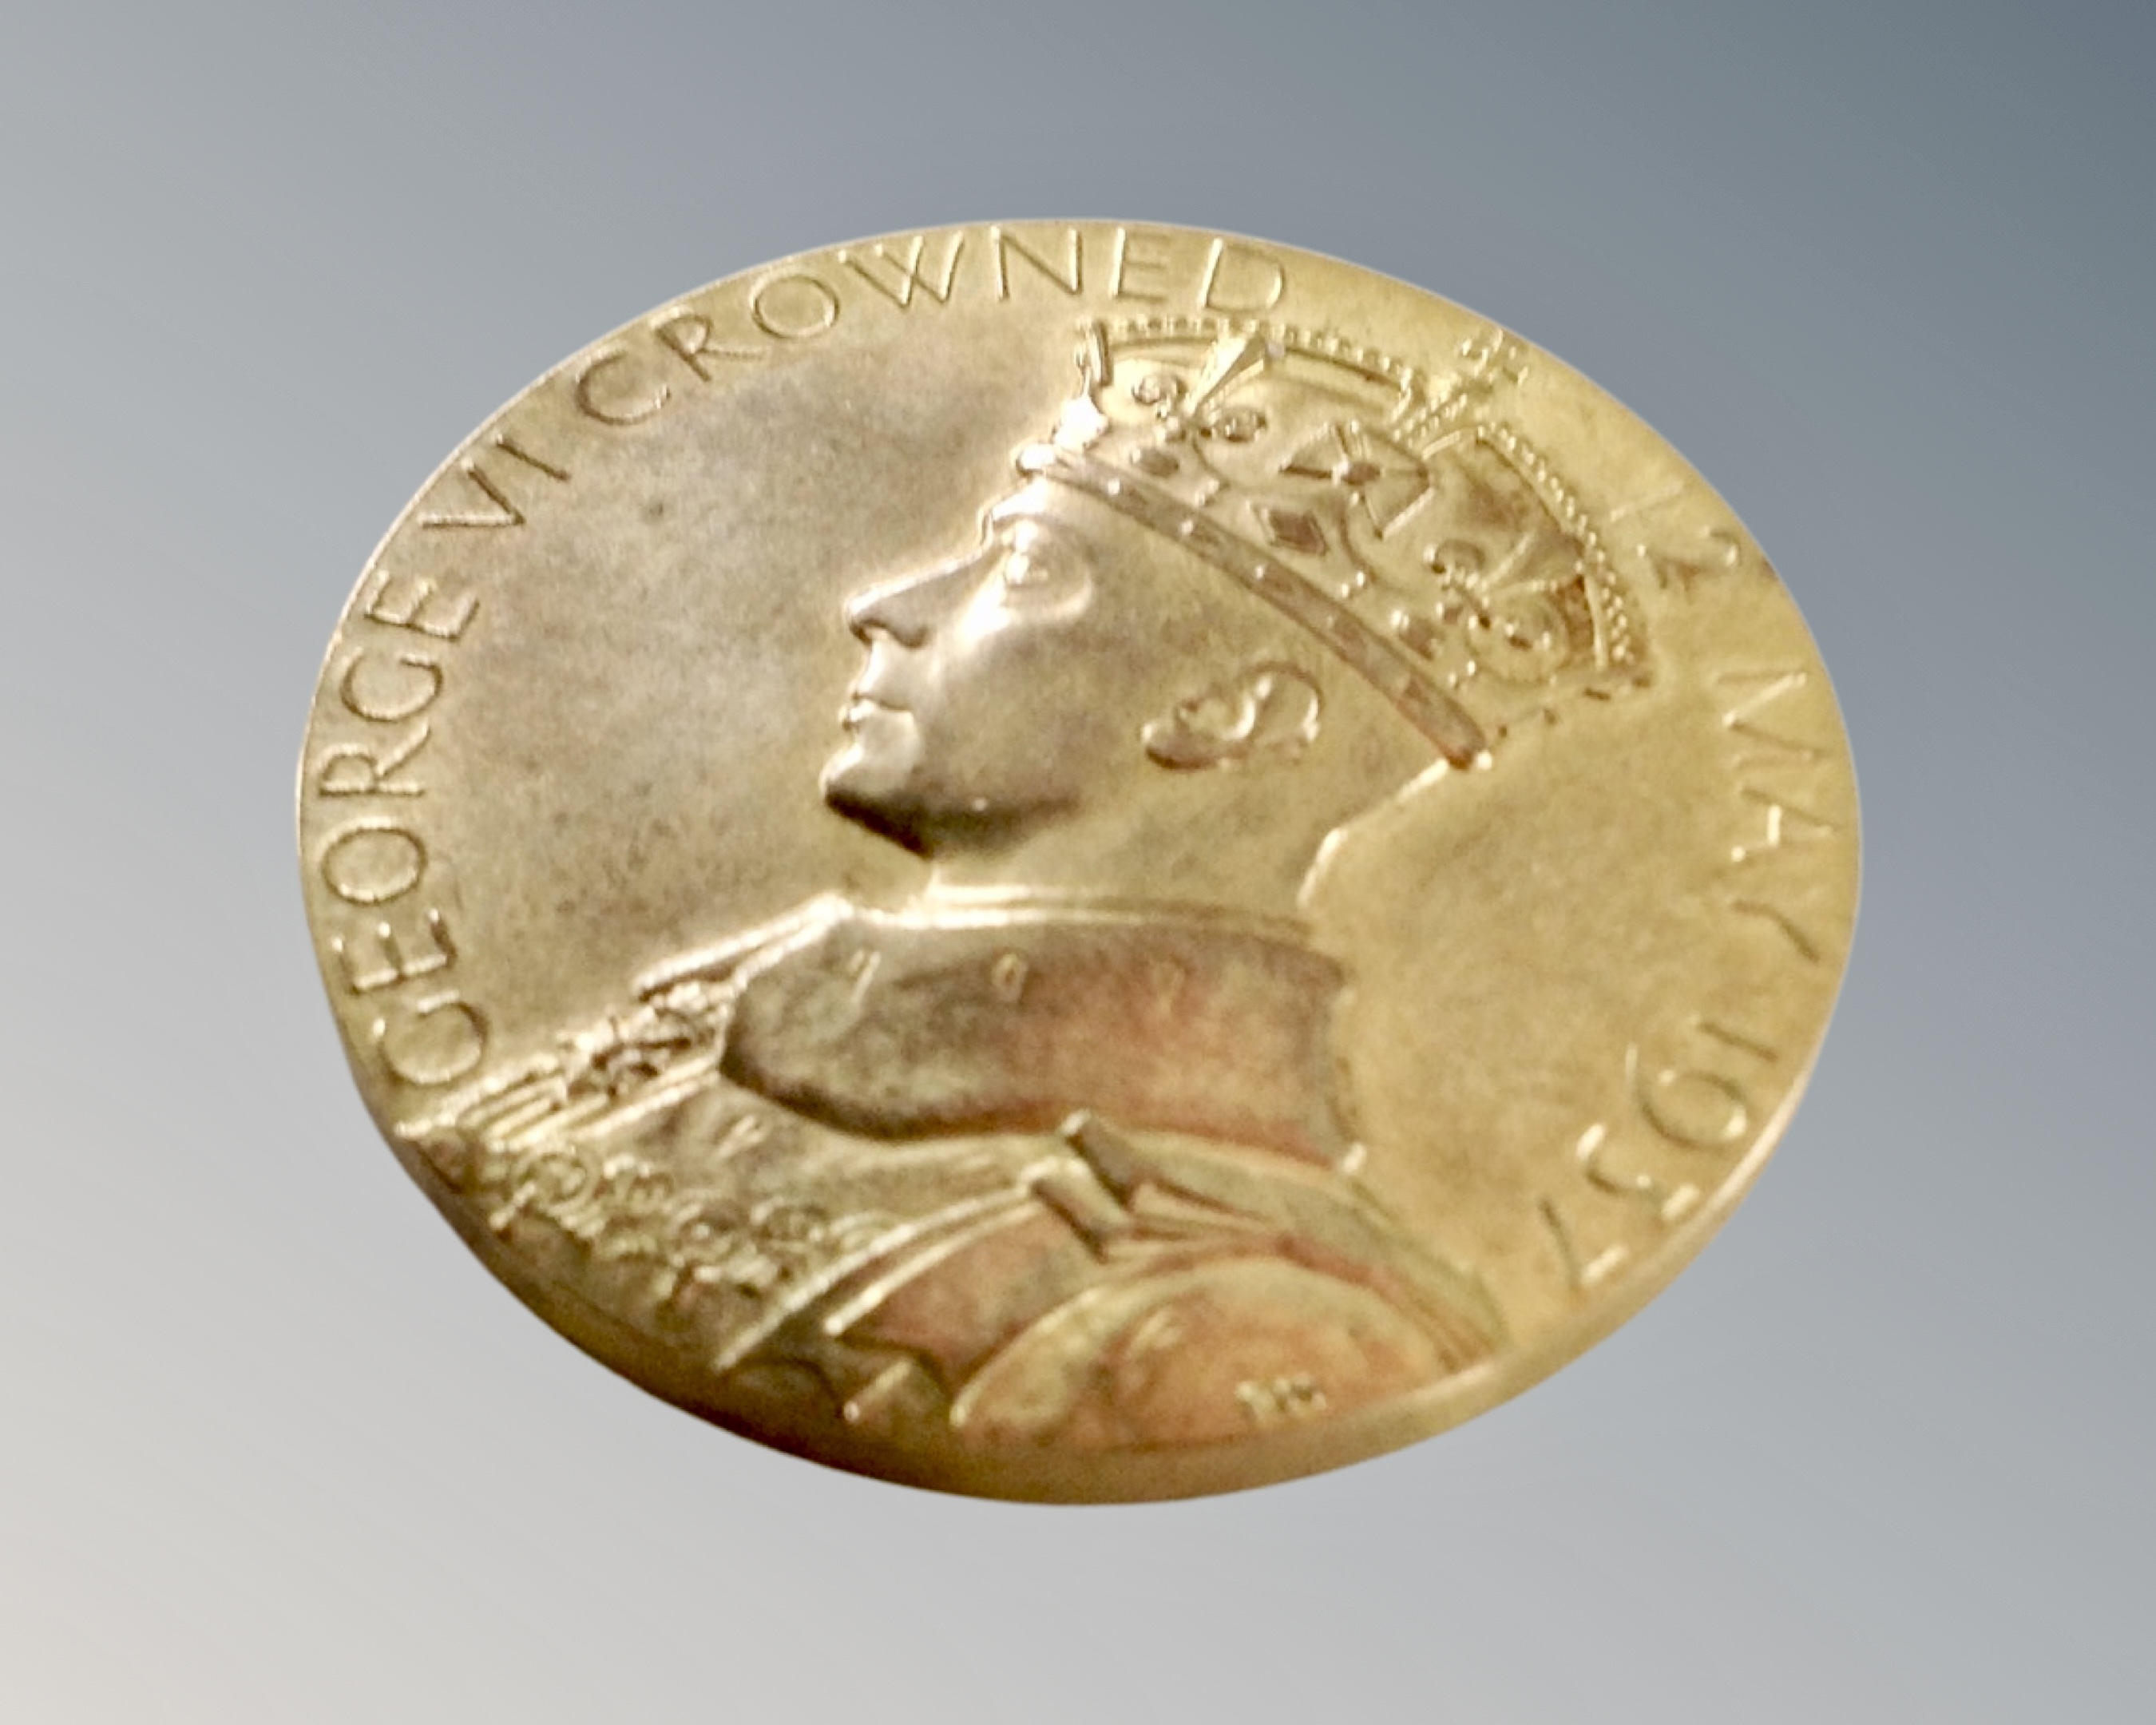 A 1937 gold plated coronation medal